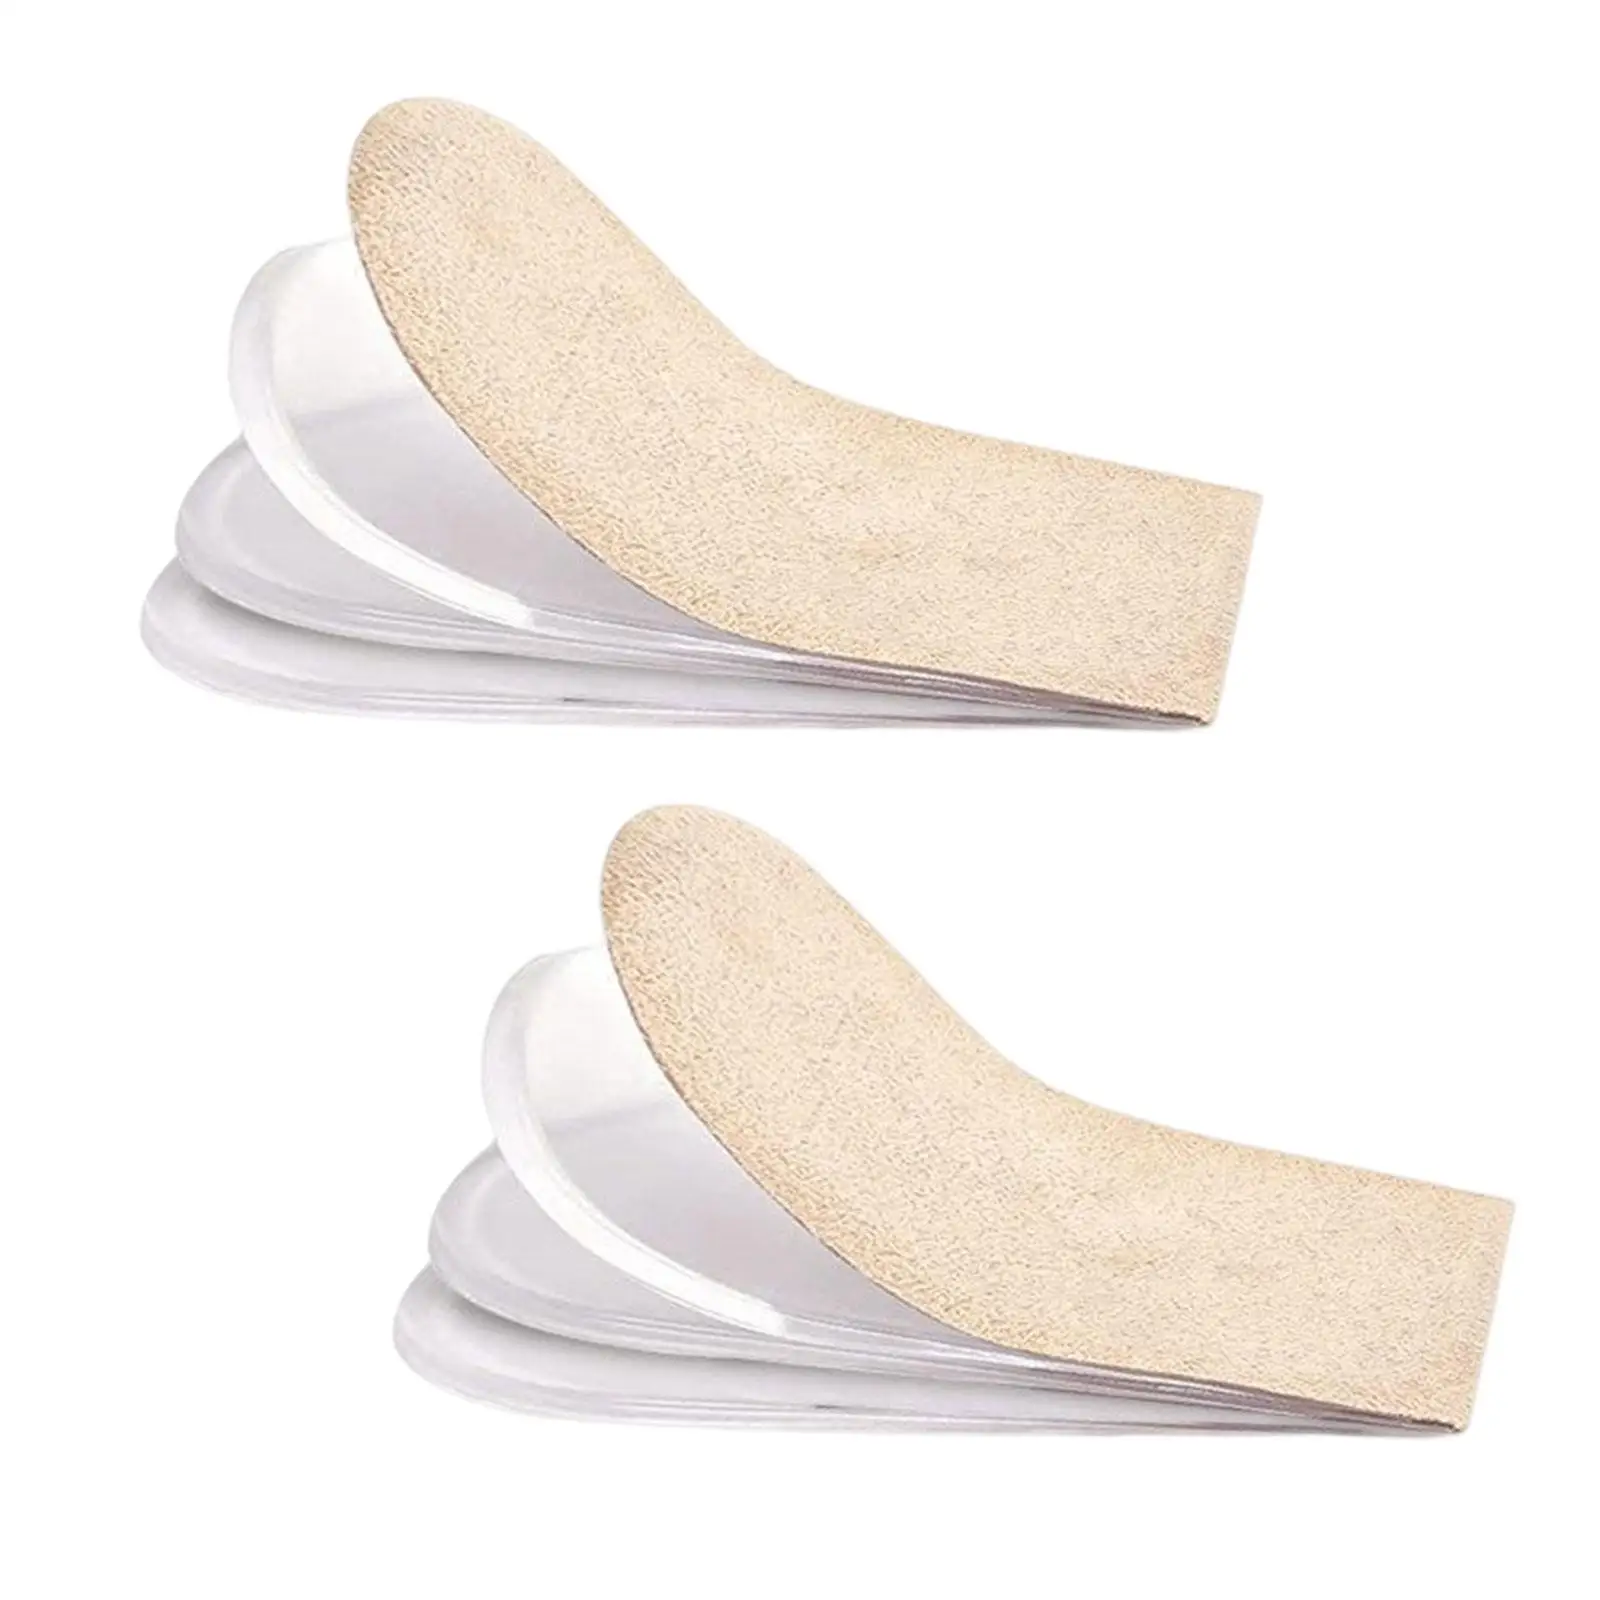 Height Increase Insoles Taller Shoe Inserts 4 Layers Anti Slip for Boots